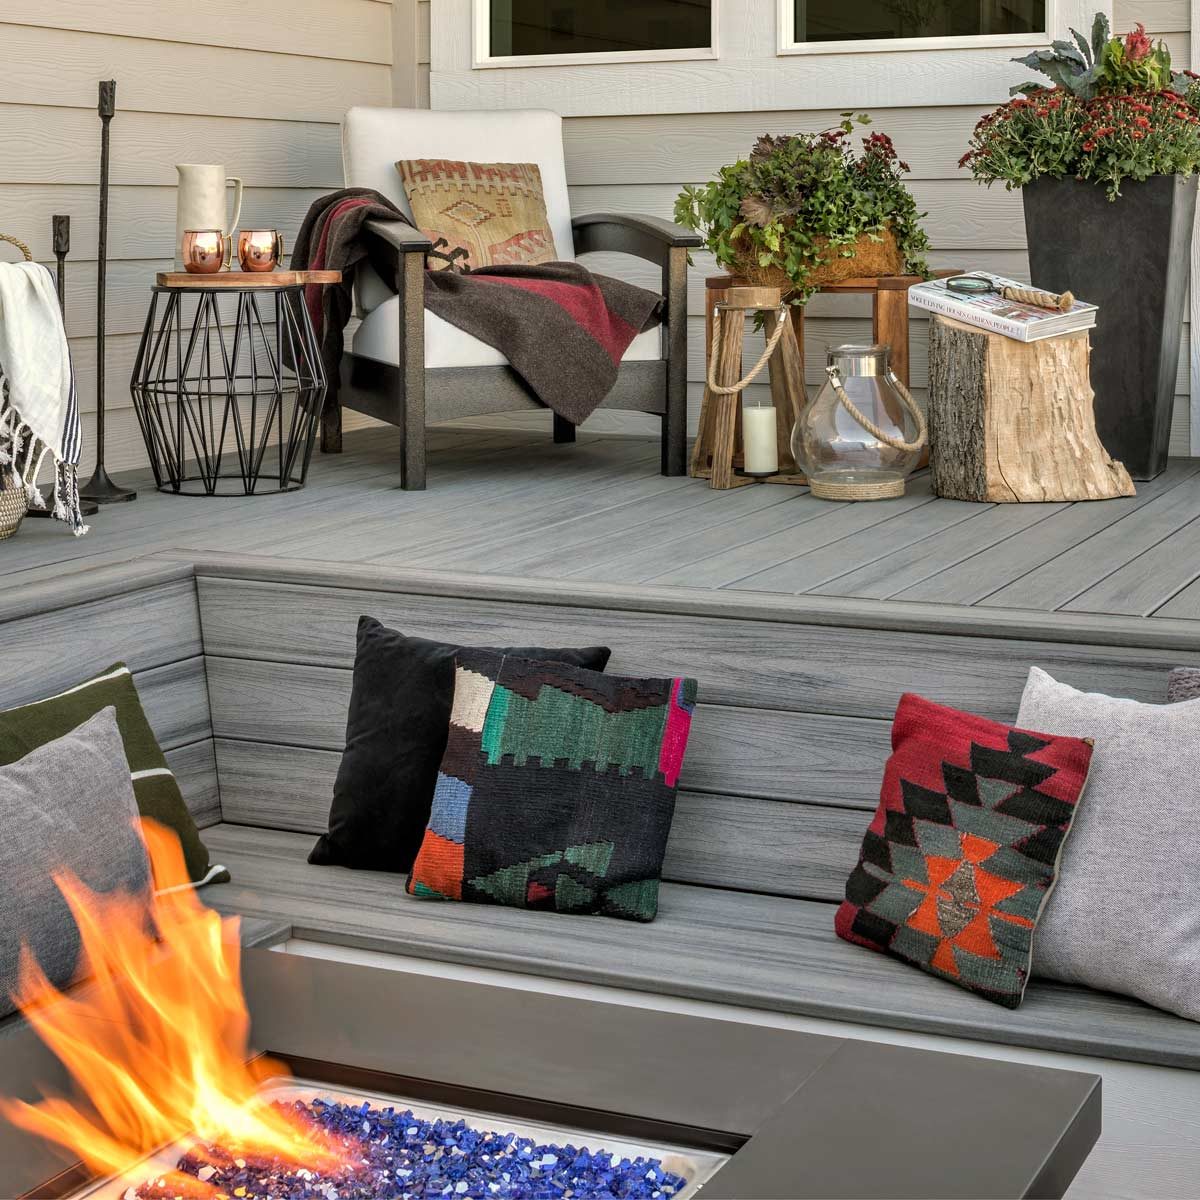 Trex Deck Ideas For Any Outdoor Space, Can You Put A Propane Fire Pit On Trex Deck